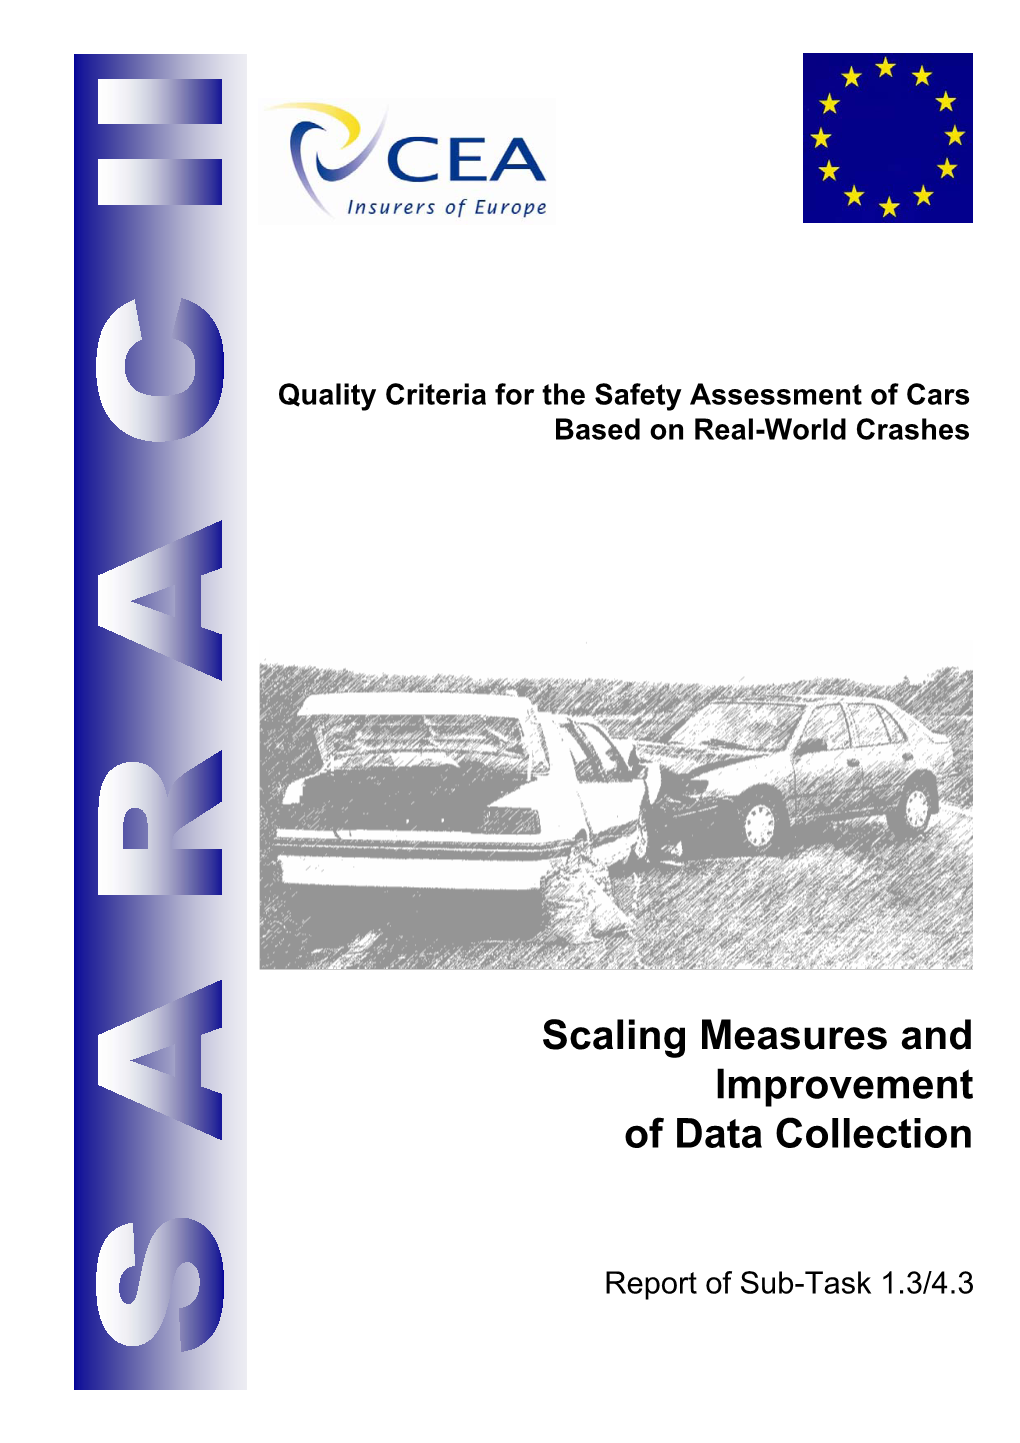 Scaling Measures and Improvement of Data Collection